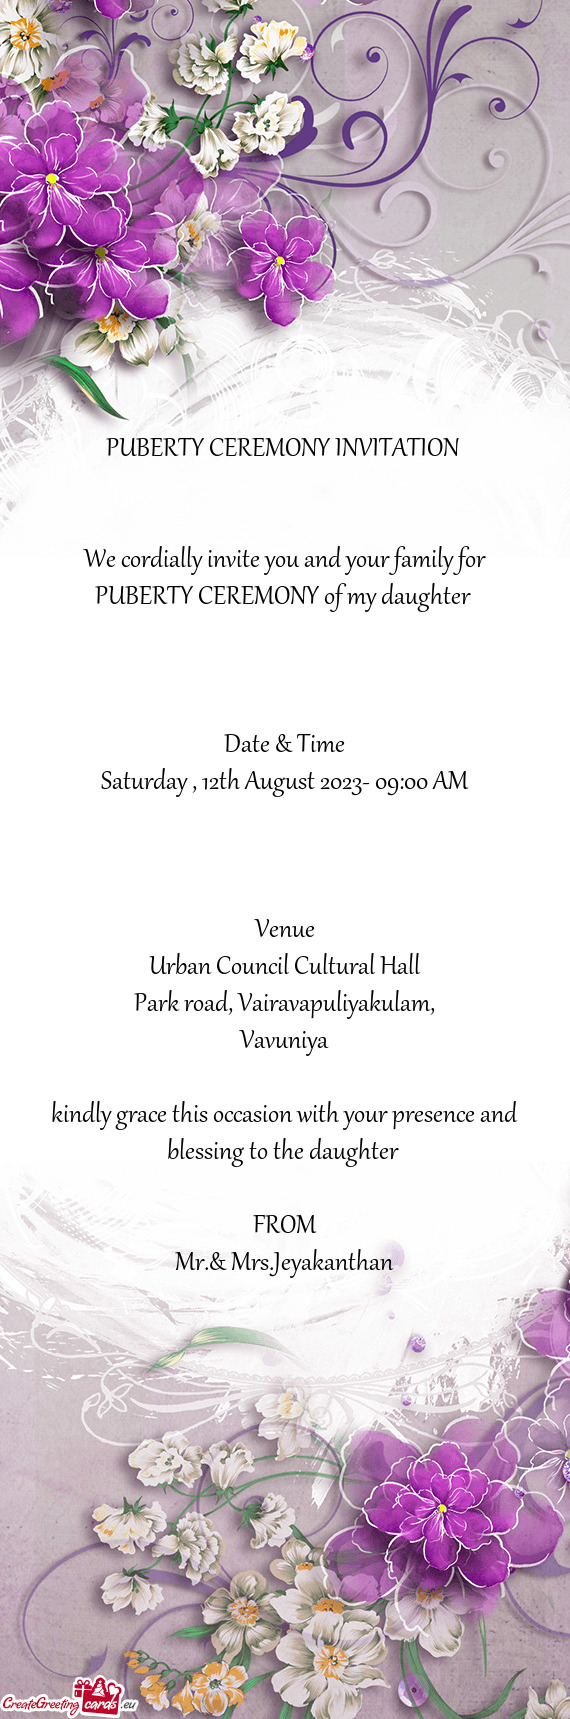 We cordially invite you and your family for PUBERTY CEREMONY of my daughter